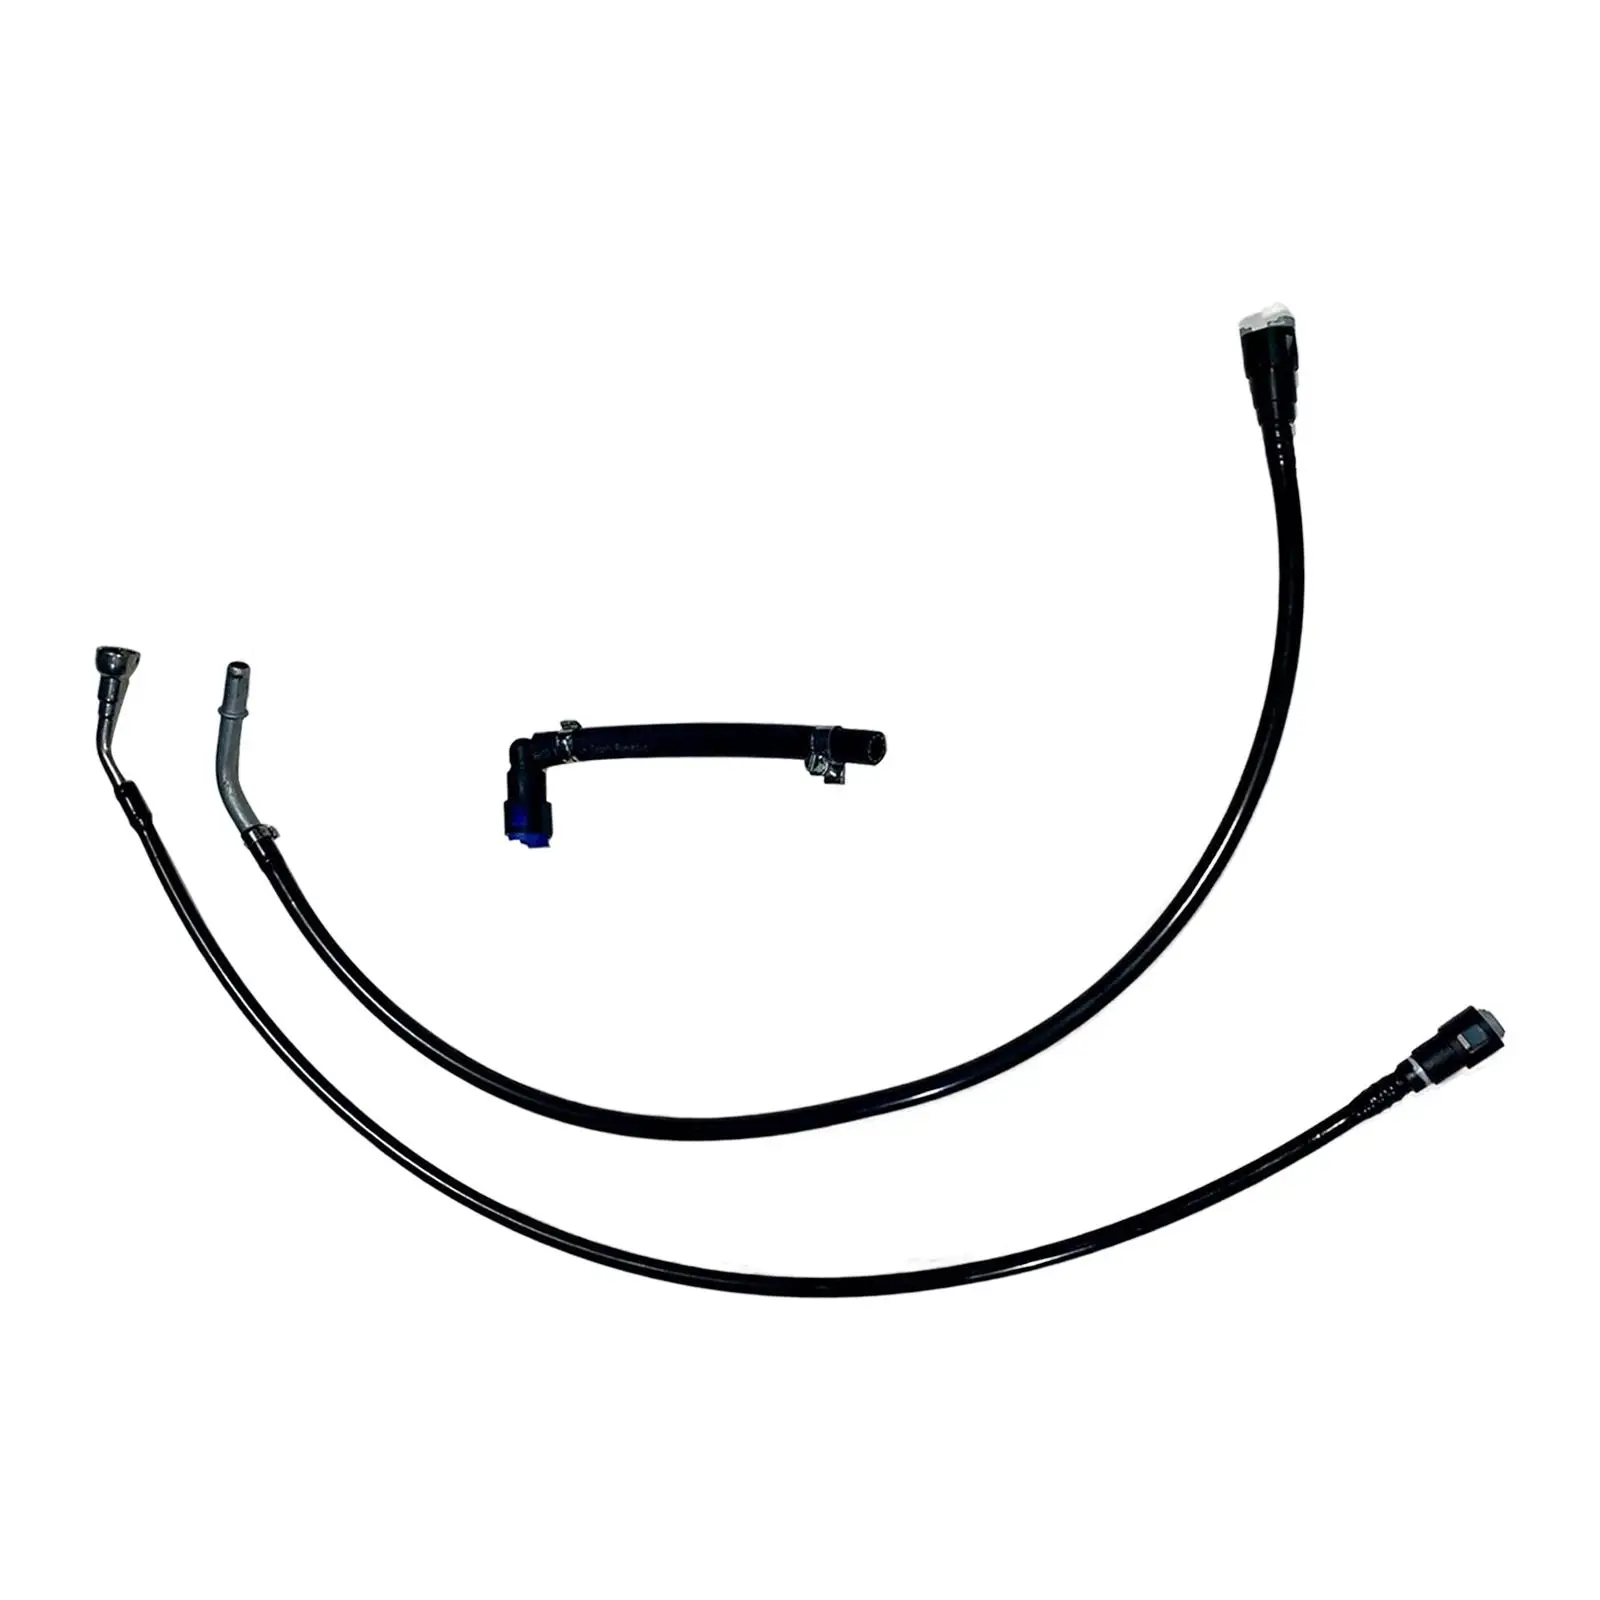 Fuel Line Set Durable Long Service Life High Performance Car Accessories Replacement Part for Jeep Grand Cherokee 1999-2004